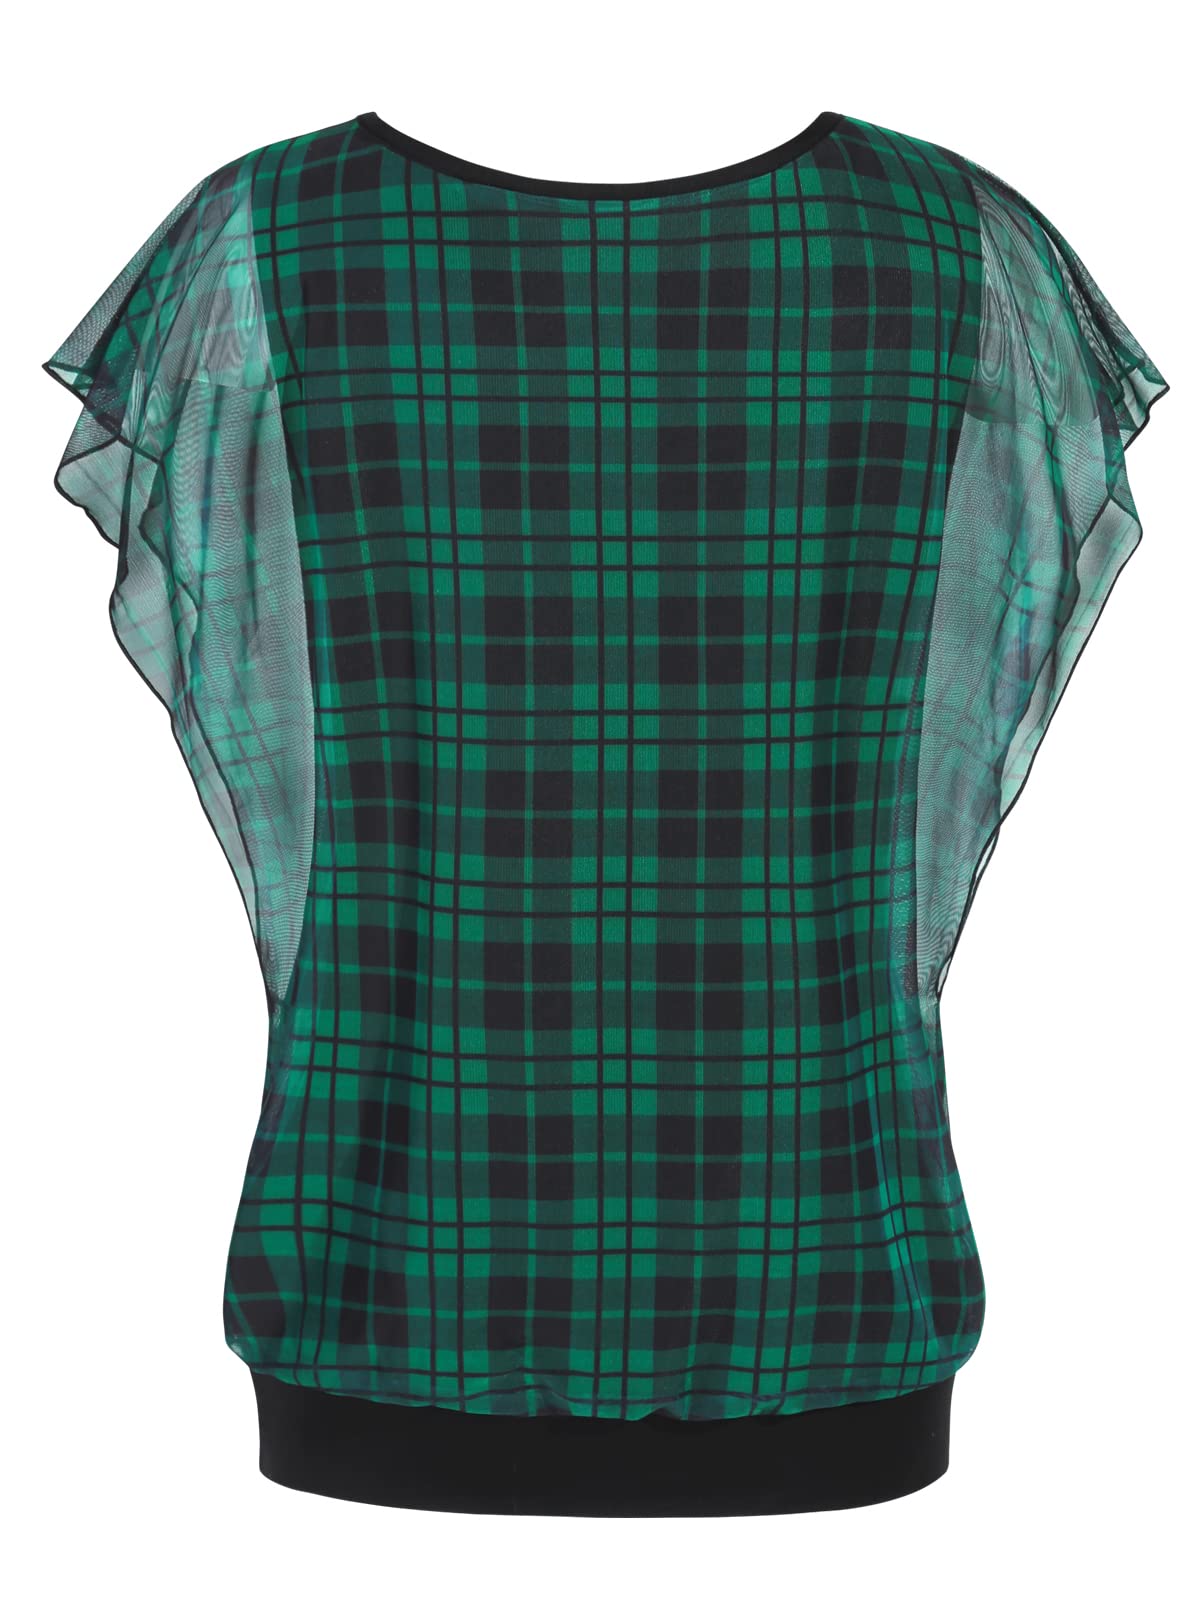 BAISHENGGT Green Plaid Detachable Corsage Women's Printed Flouncing Flared Short Sleeve Mesh Blouse Tops